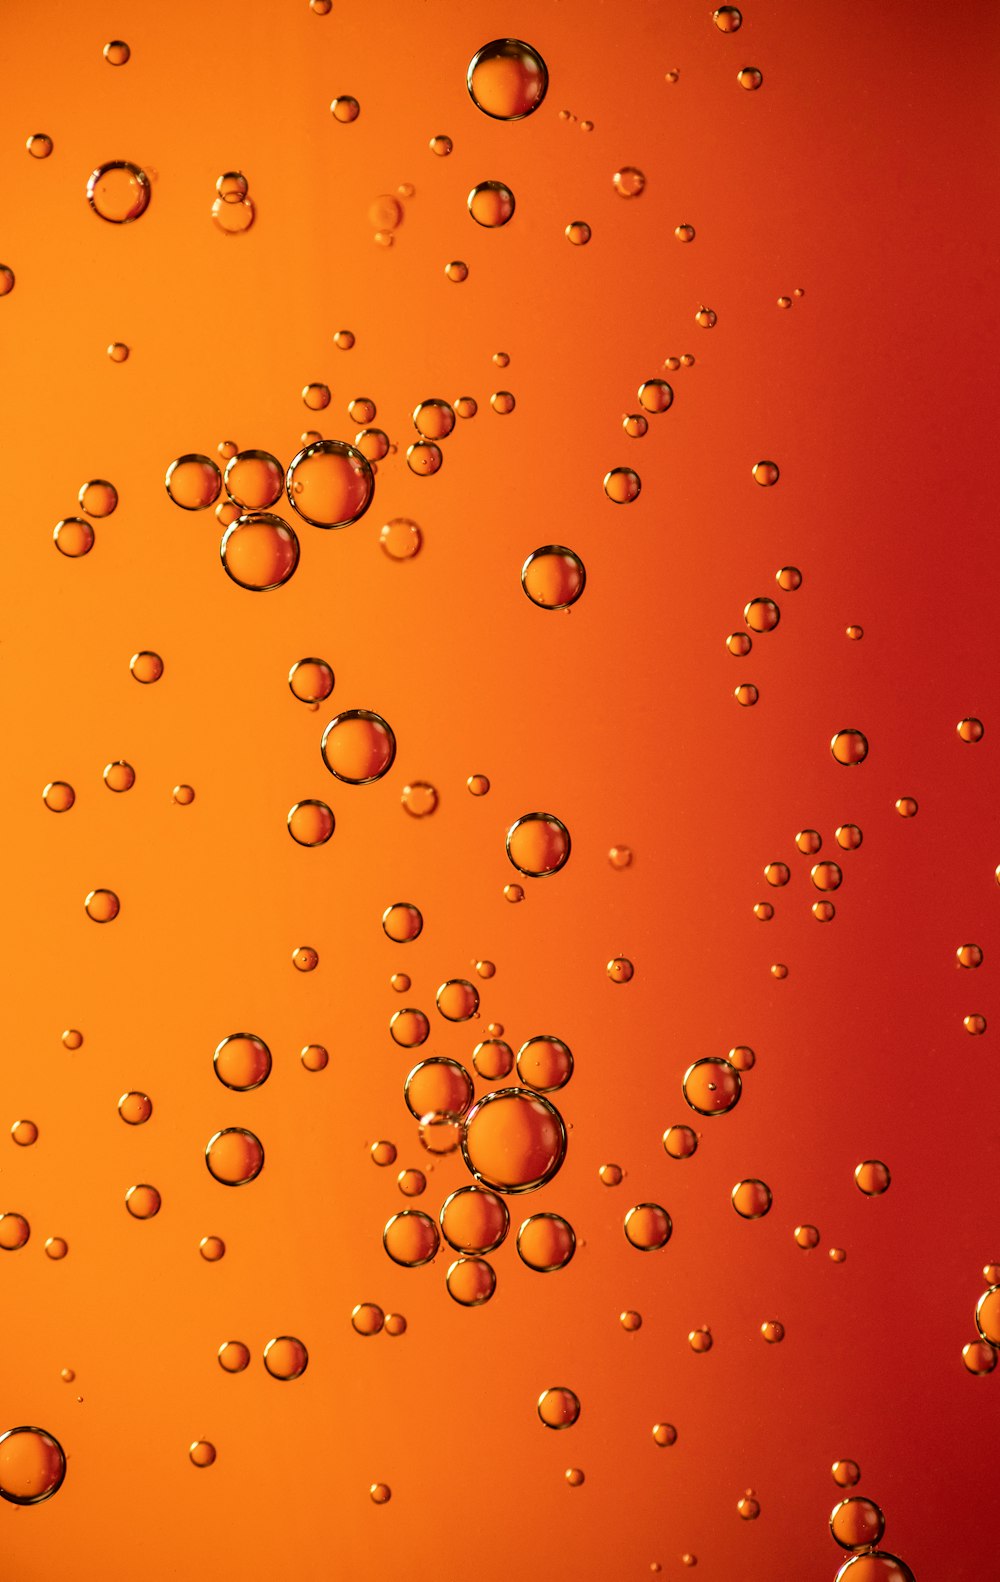 water droplets on orange surface